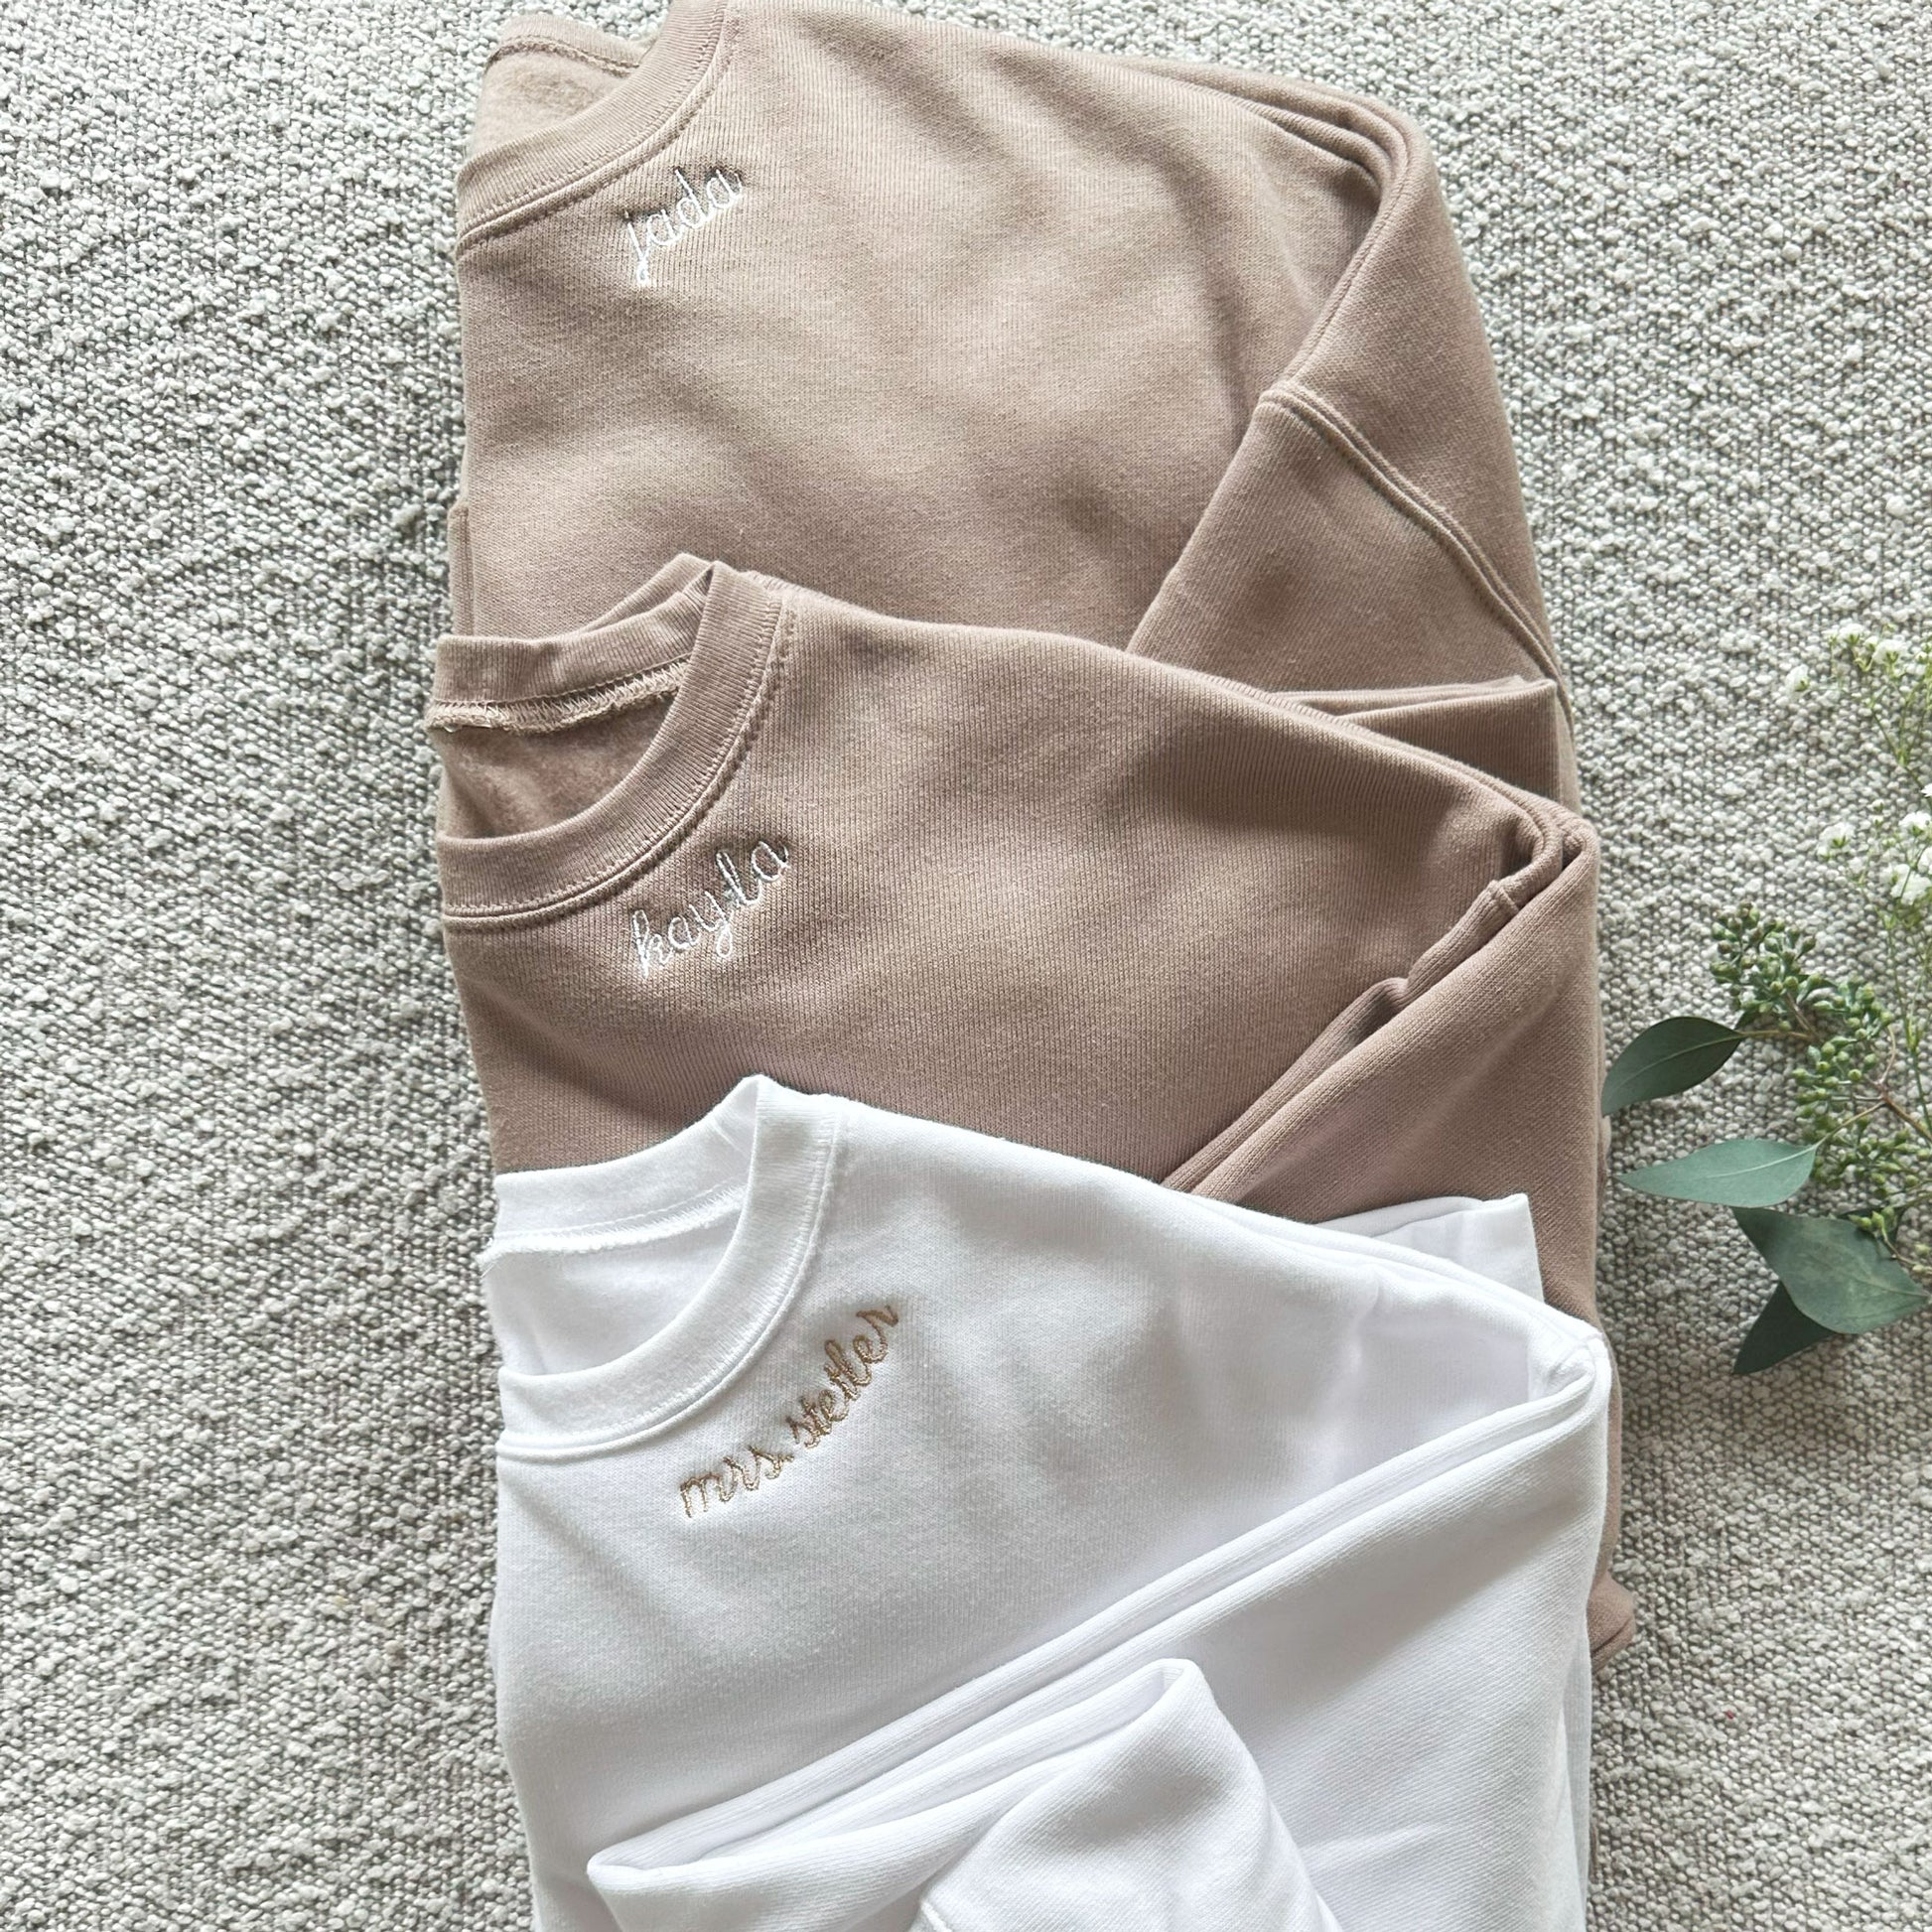 two tan crewneck sweatshirts with white neckline embroidery and a white crewneck sweatshirt with neckline name embroidered in camel